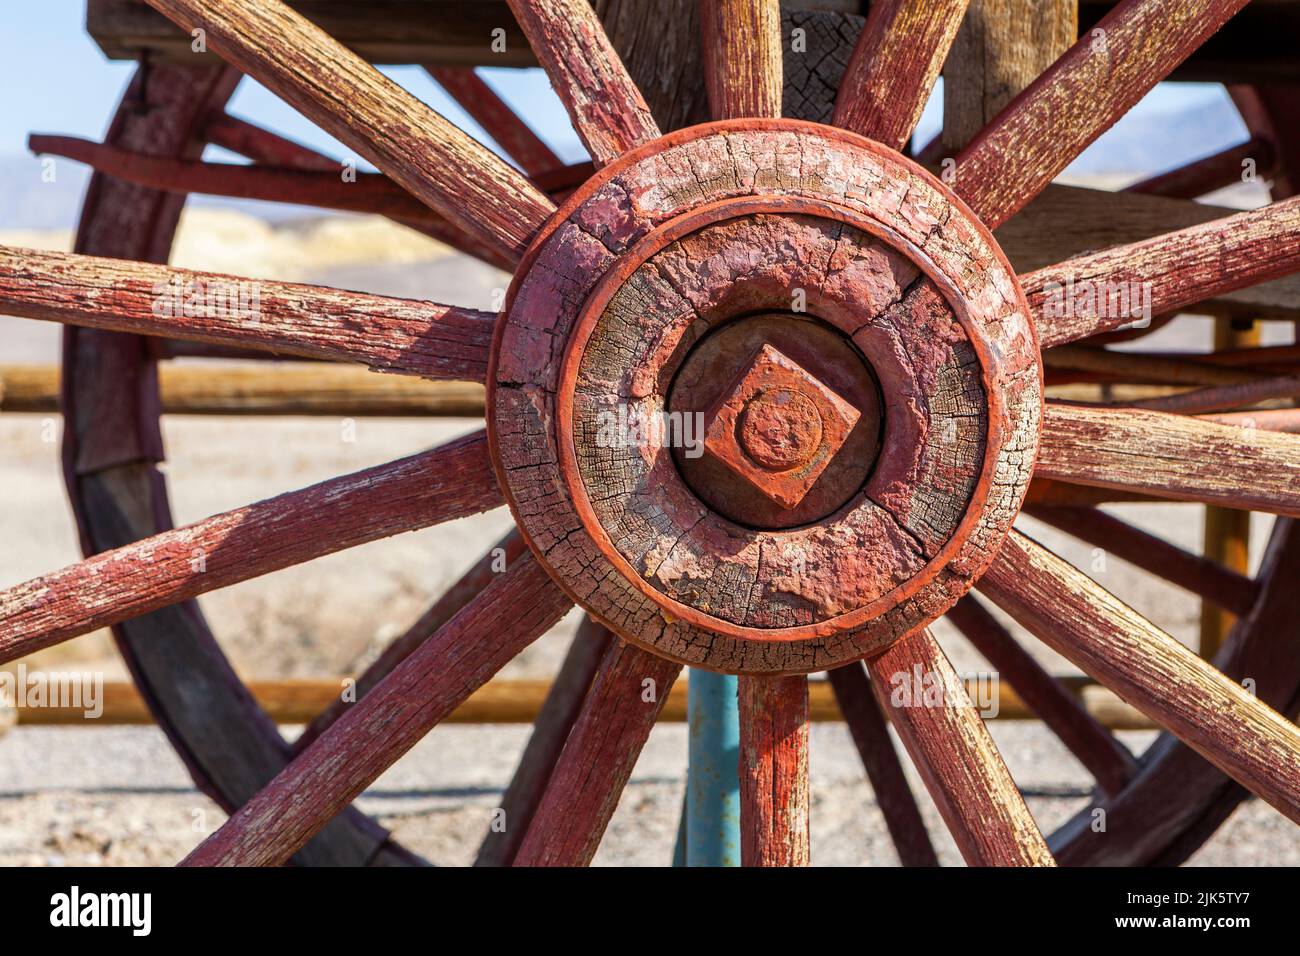 The spoked wheel on an old wooden wagon in Death Valley Stock Photo